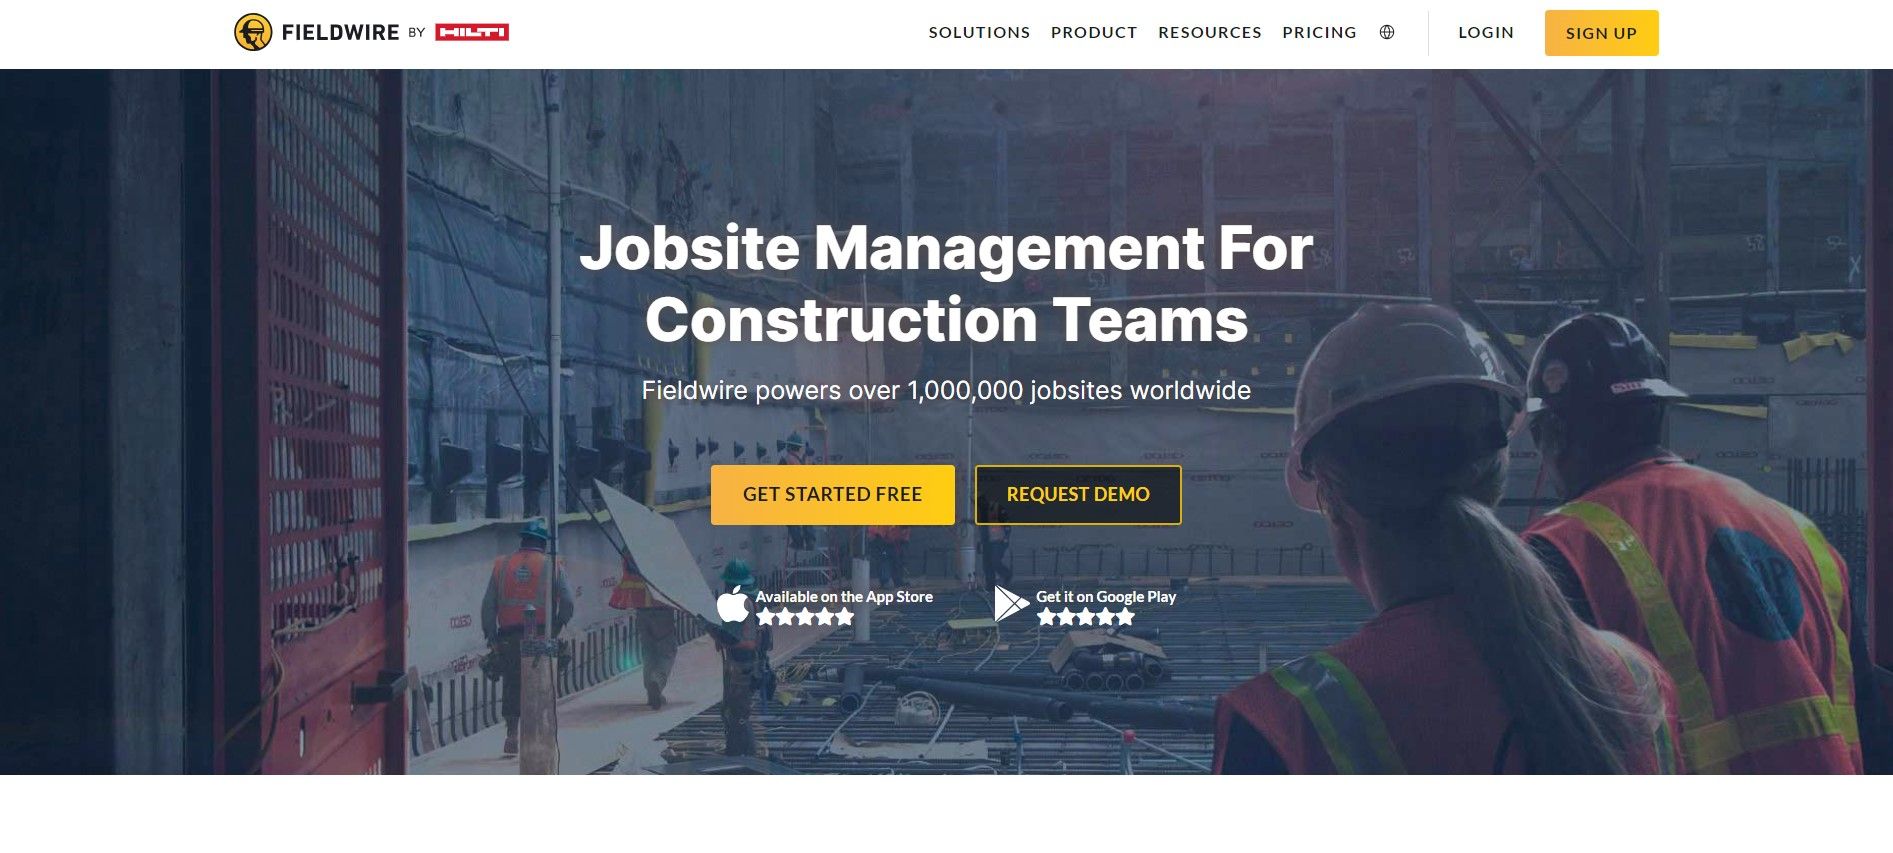 fieldwire website homepage showing construction workers working and mentioned in the top 'jobsite management for construction teams'